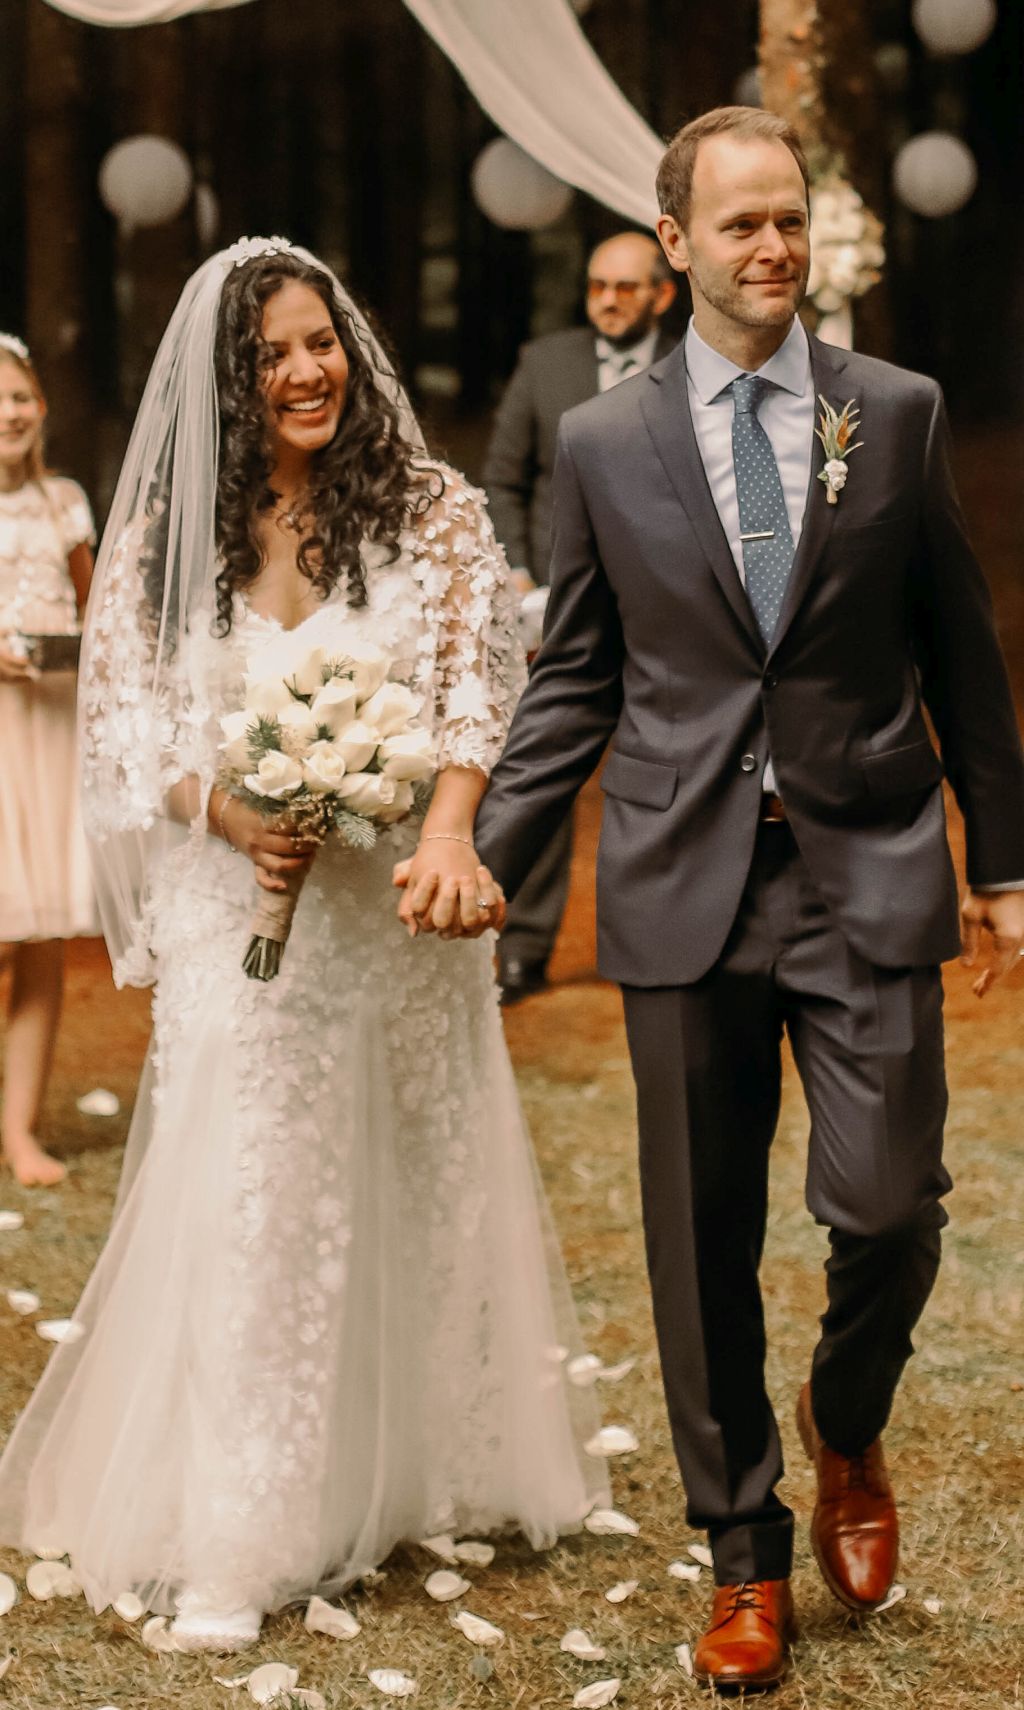 A Christian bride in a beautiful white wedding dress smiles with sheer joy as she holds a bouquet of flowers in one hand, and her new husband's in the other